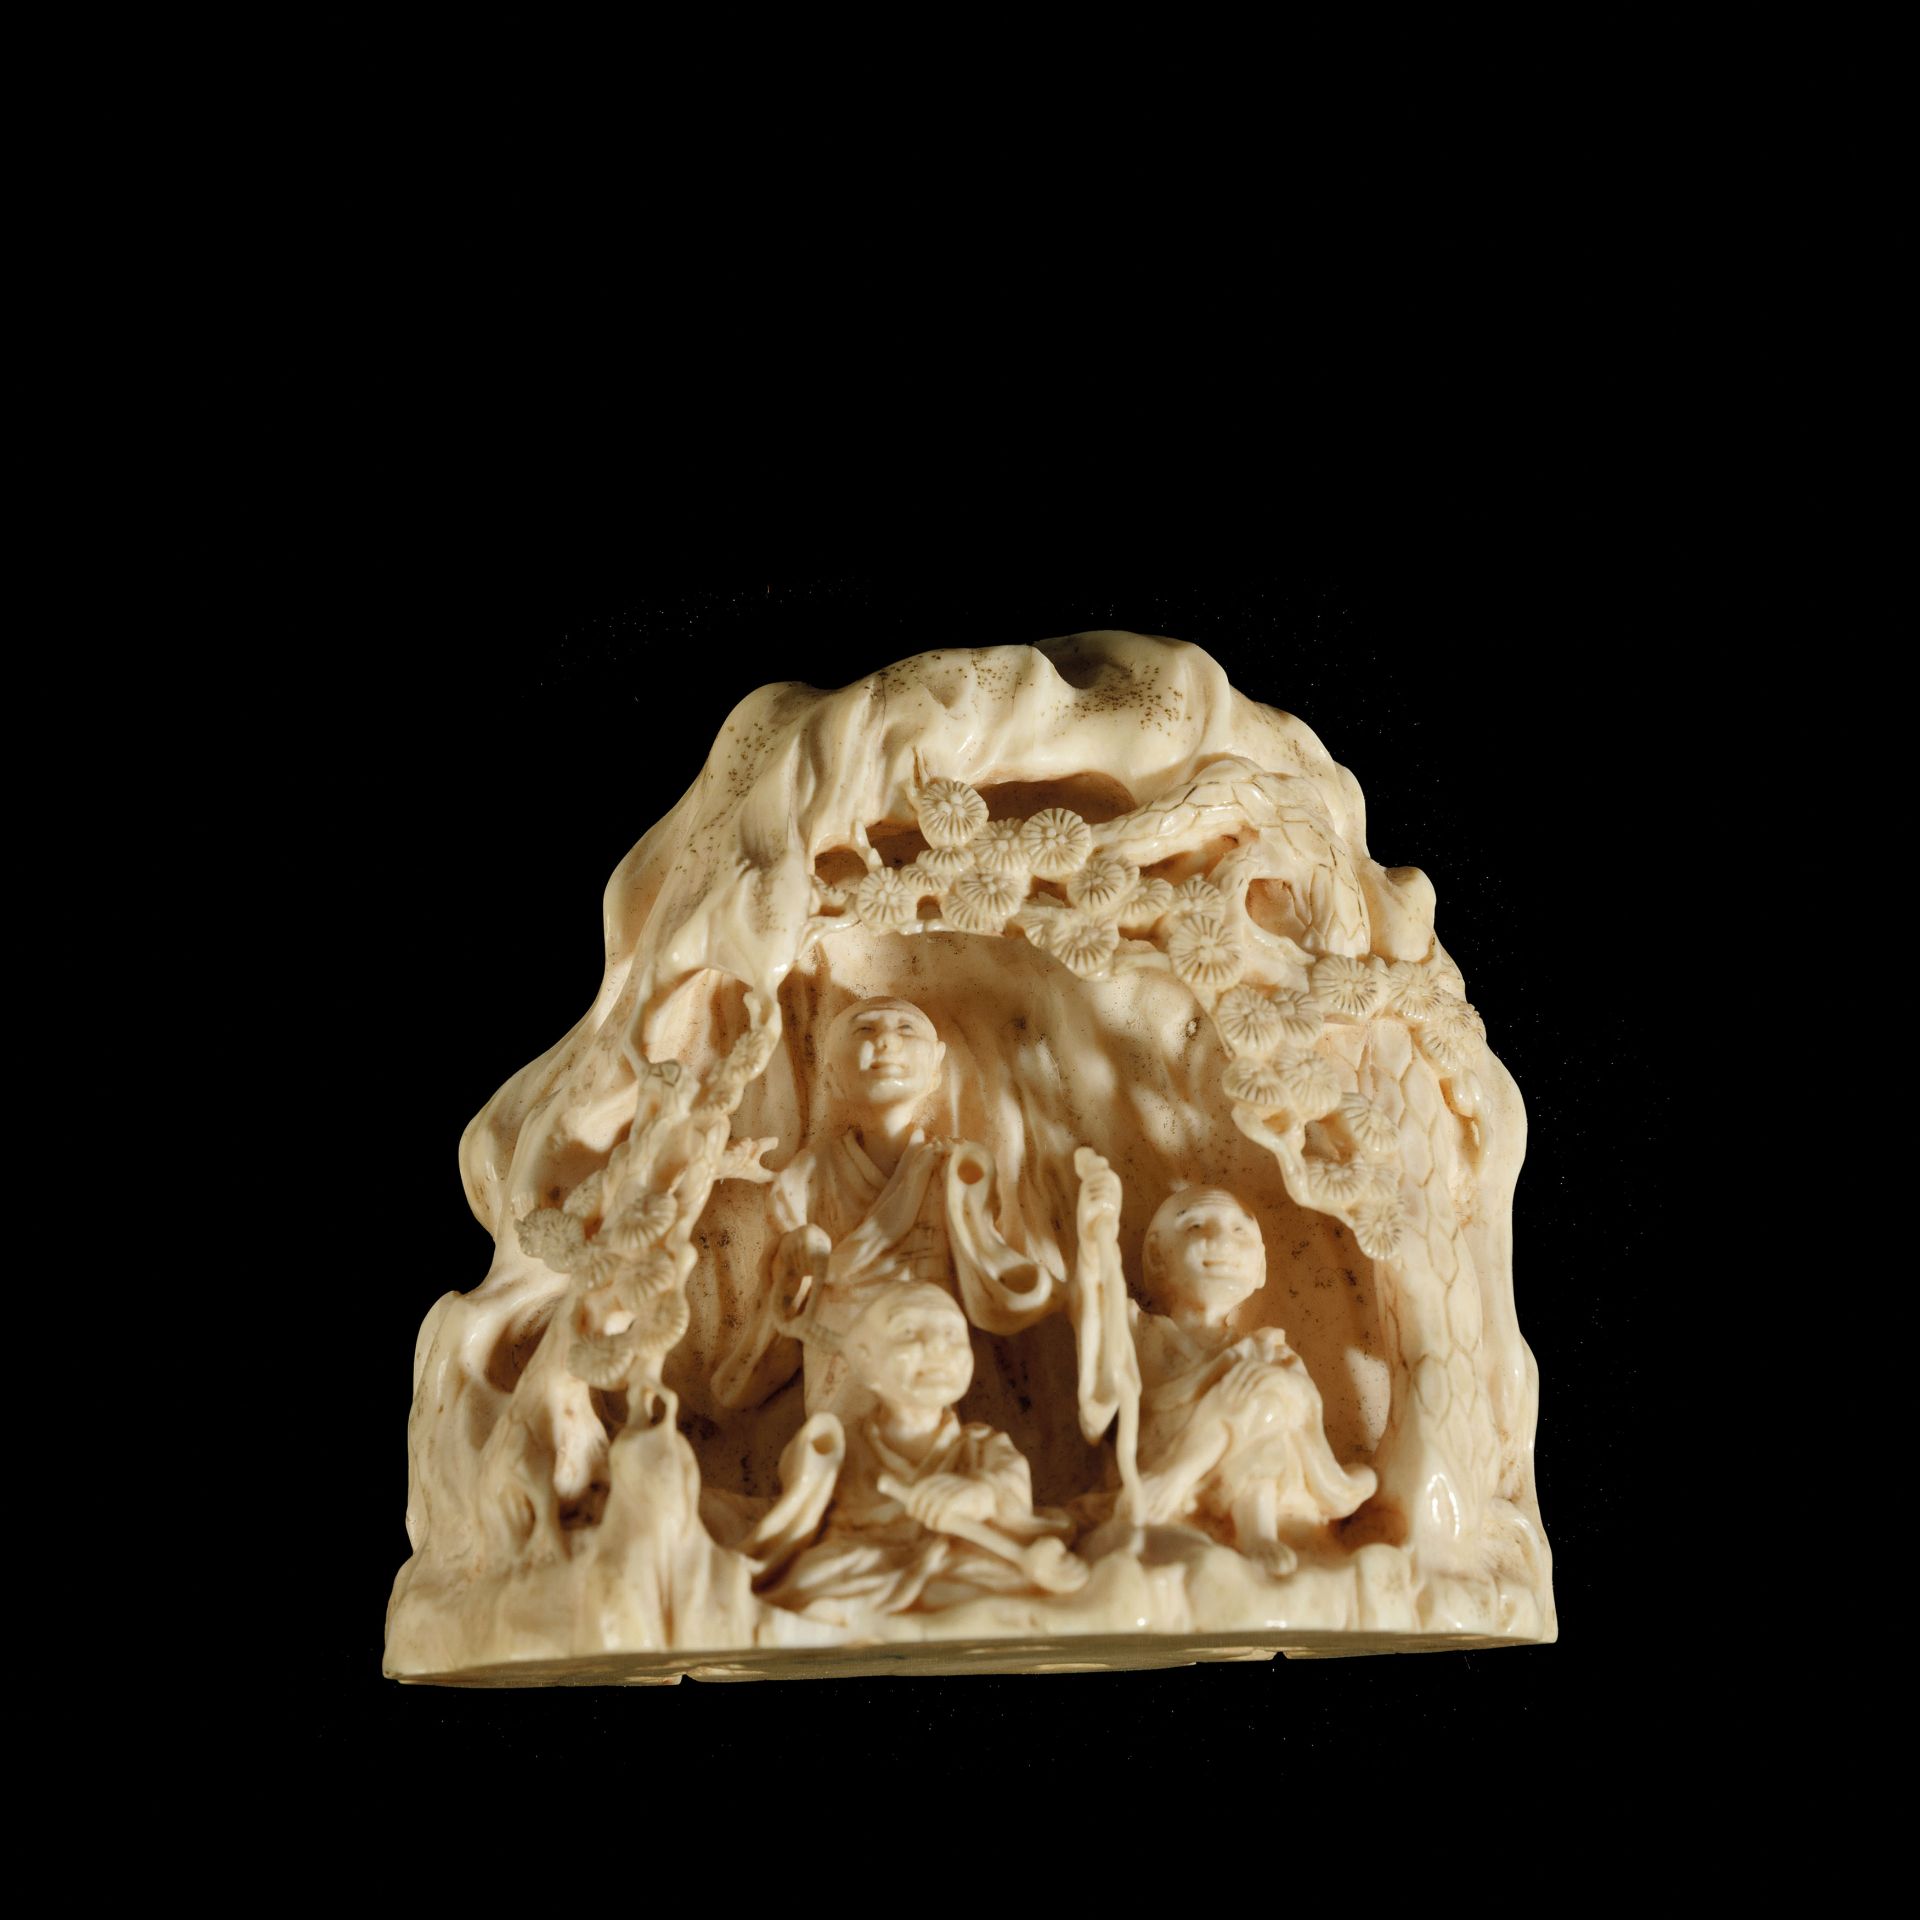 TWELVE IVORY OBJECTS TOGETHER WITH TWO WOOD STANDS, CHINA, PERIOD 18TH-19TH CENTURY (14) - Bild 3 aus 5